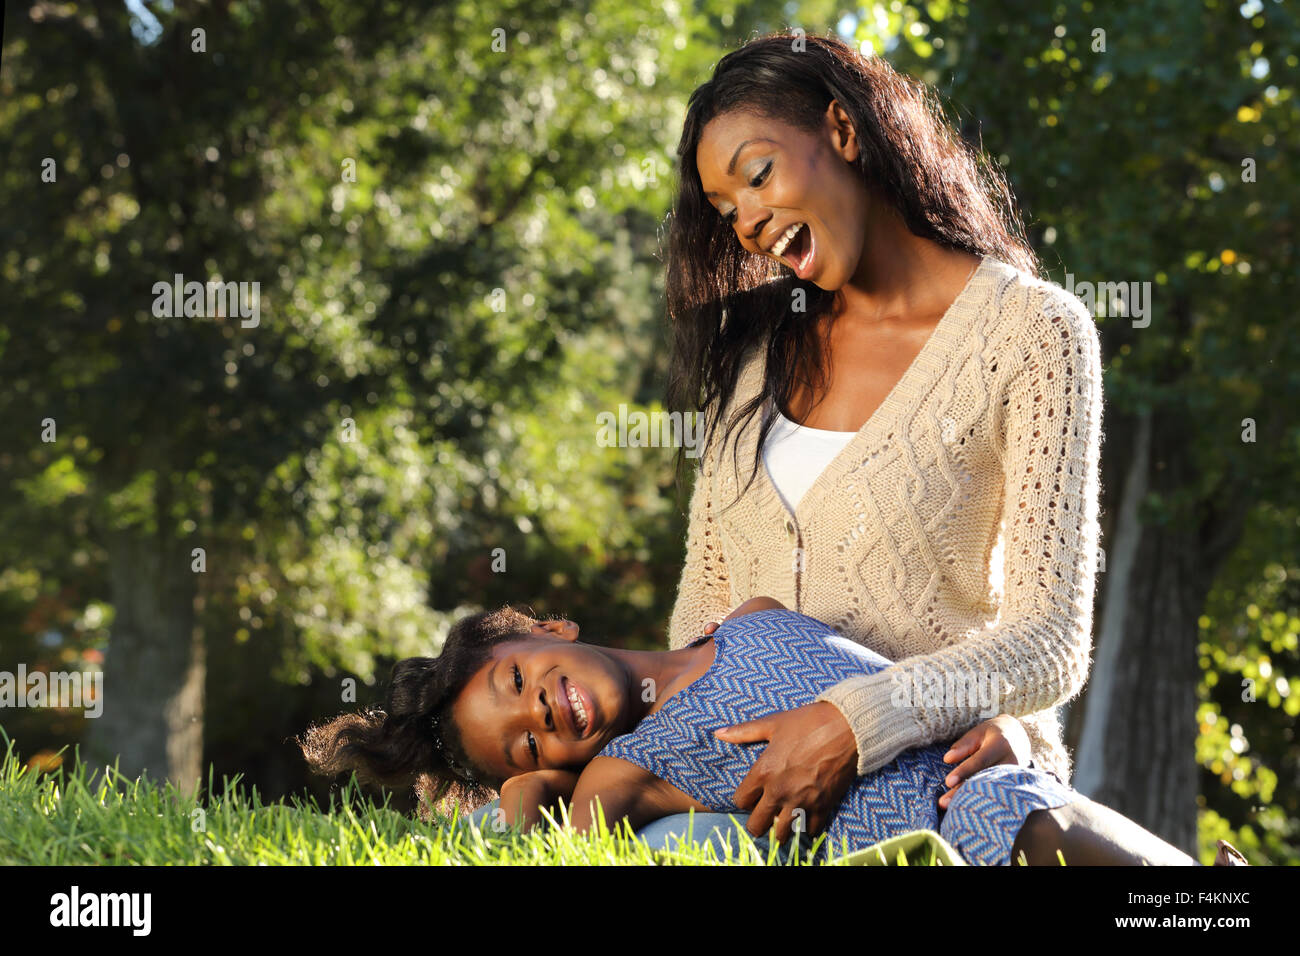 Mother and Child playing in a park Stock Photo